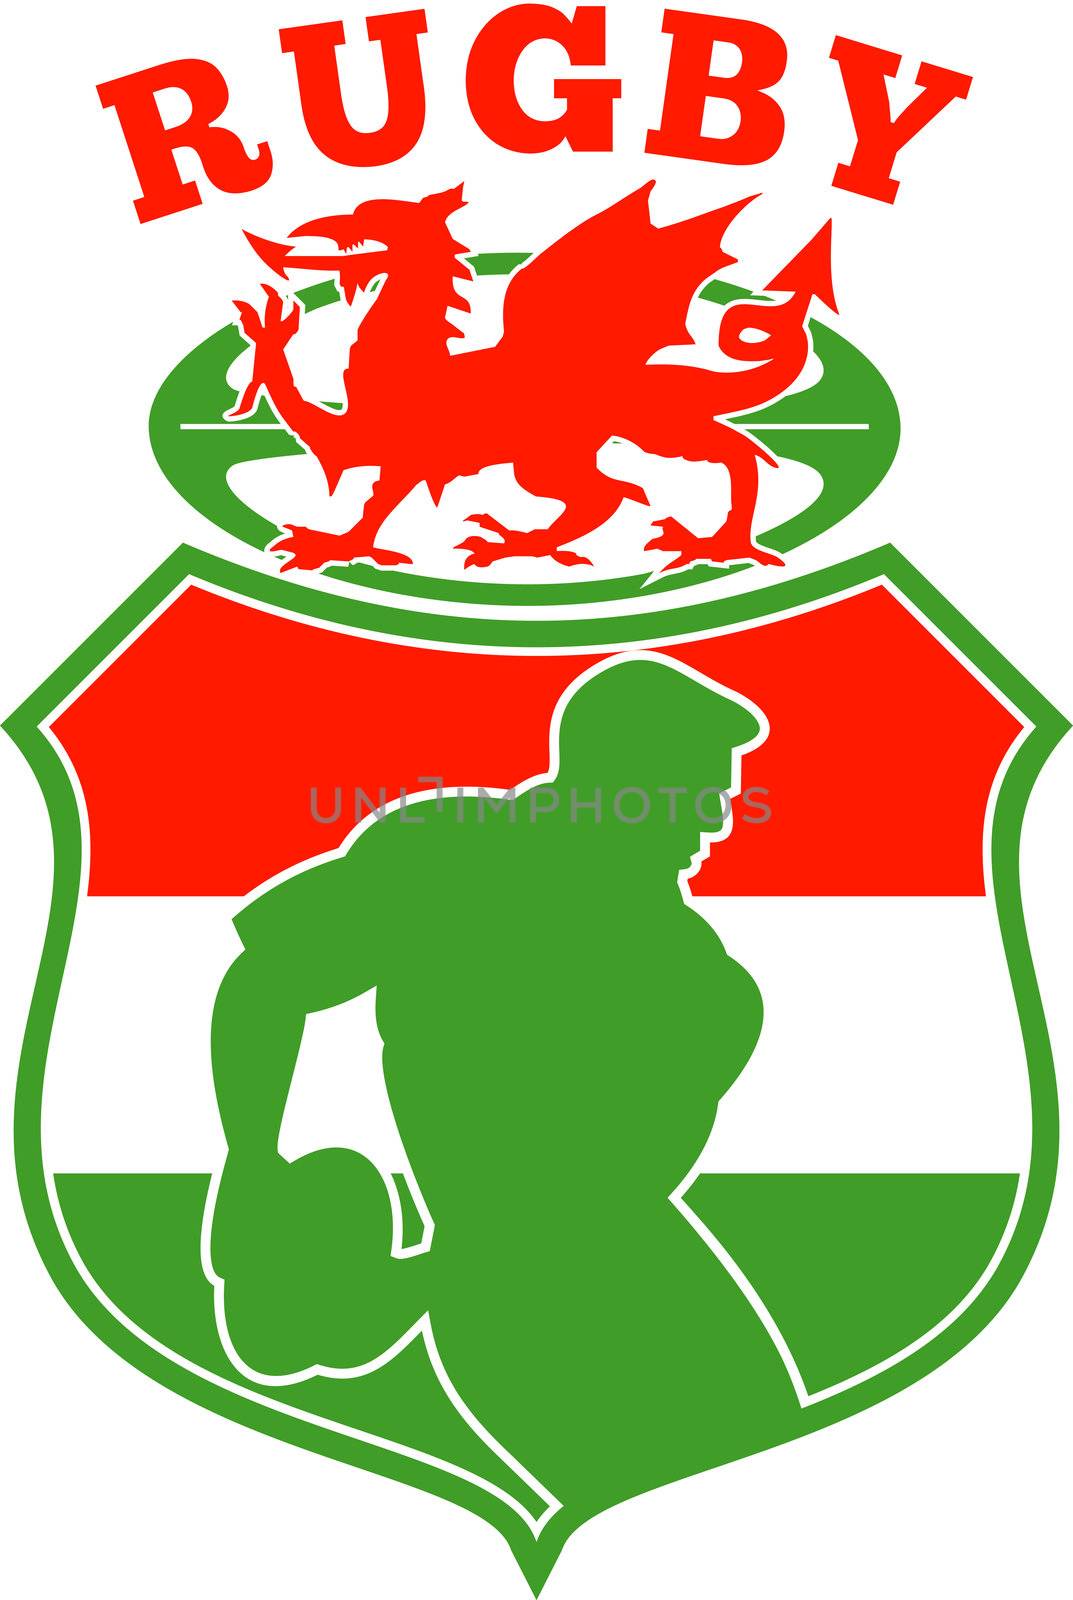 welsh rugby player wales dragon shield by patrimonio